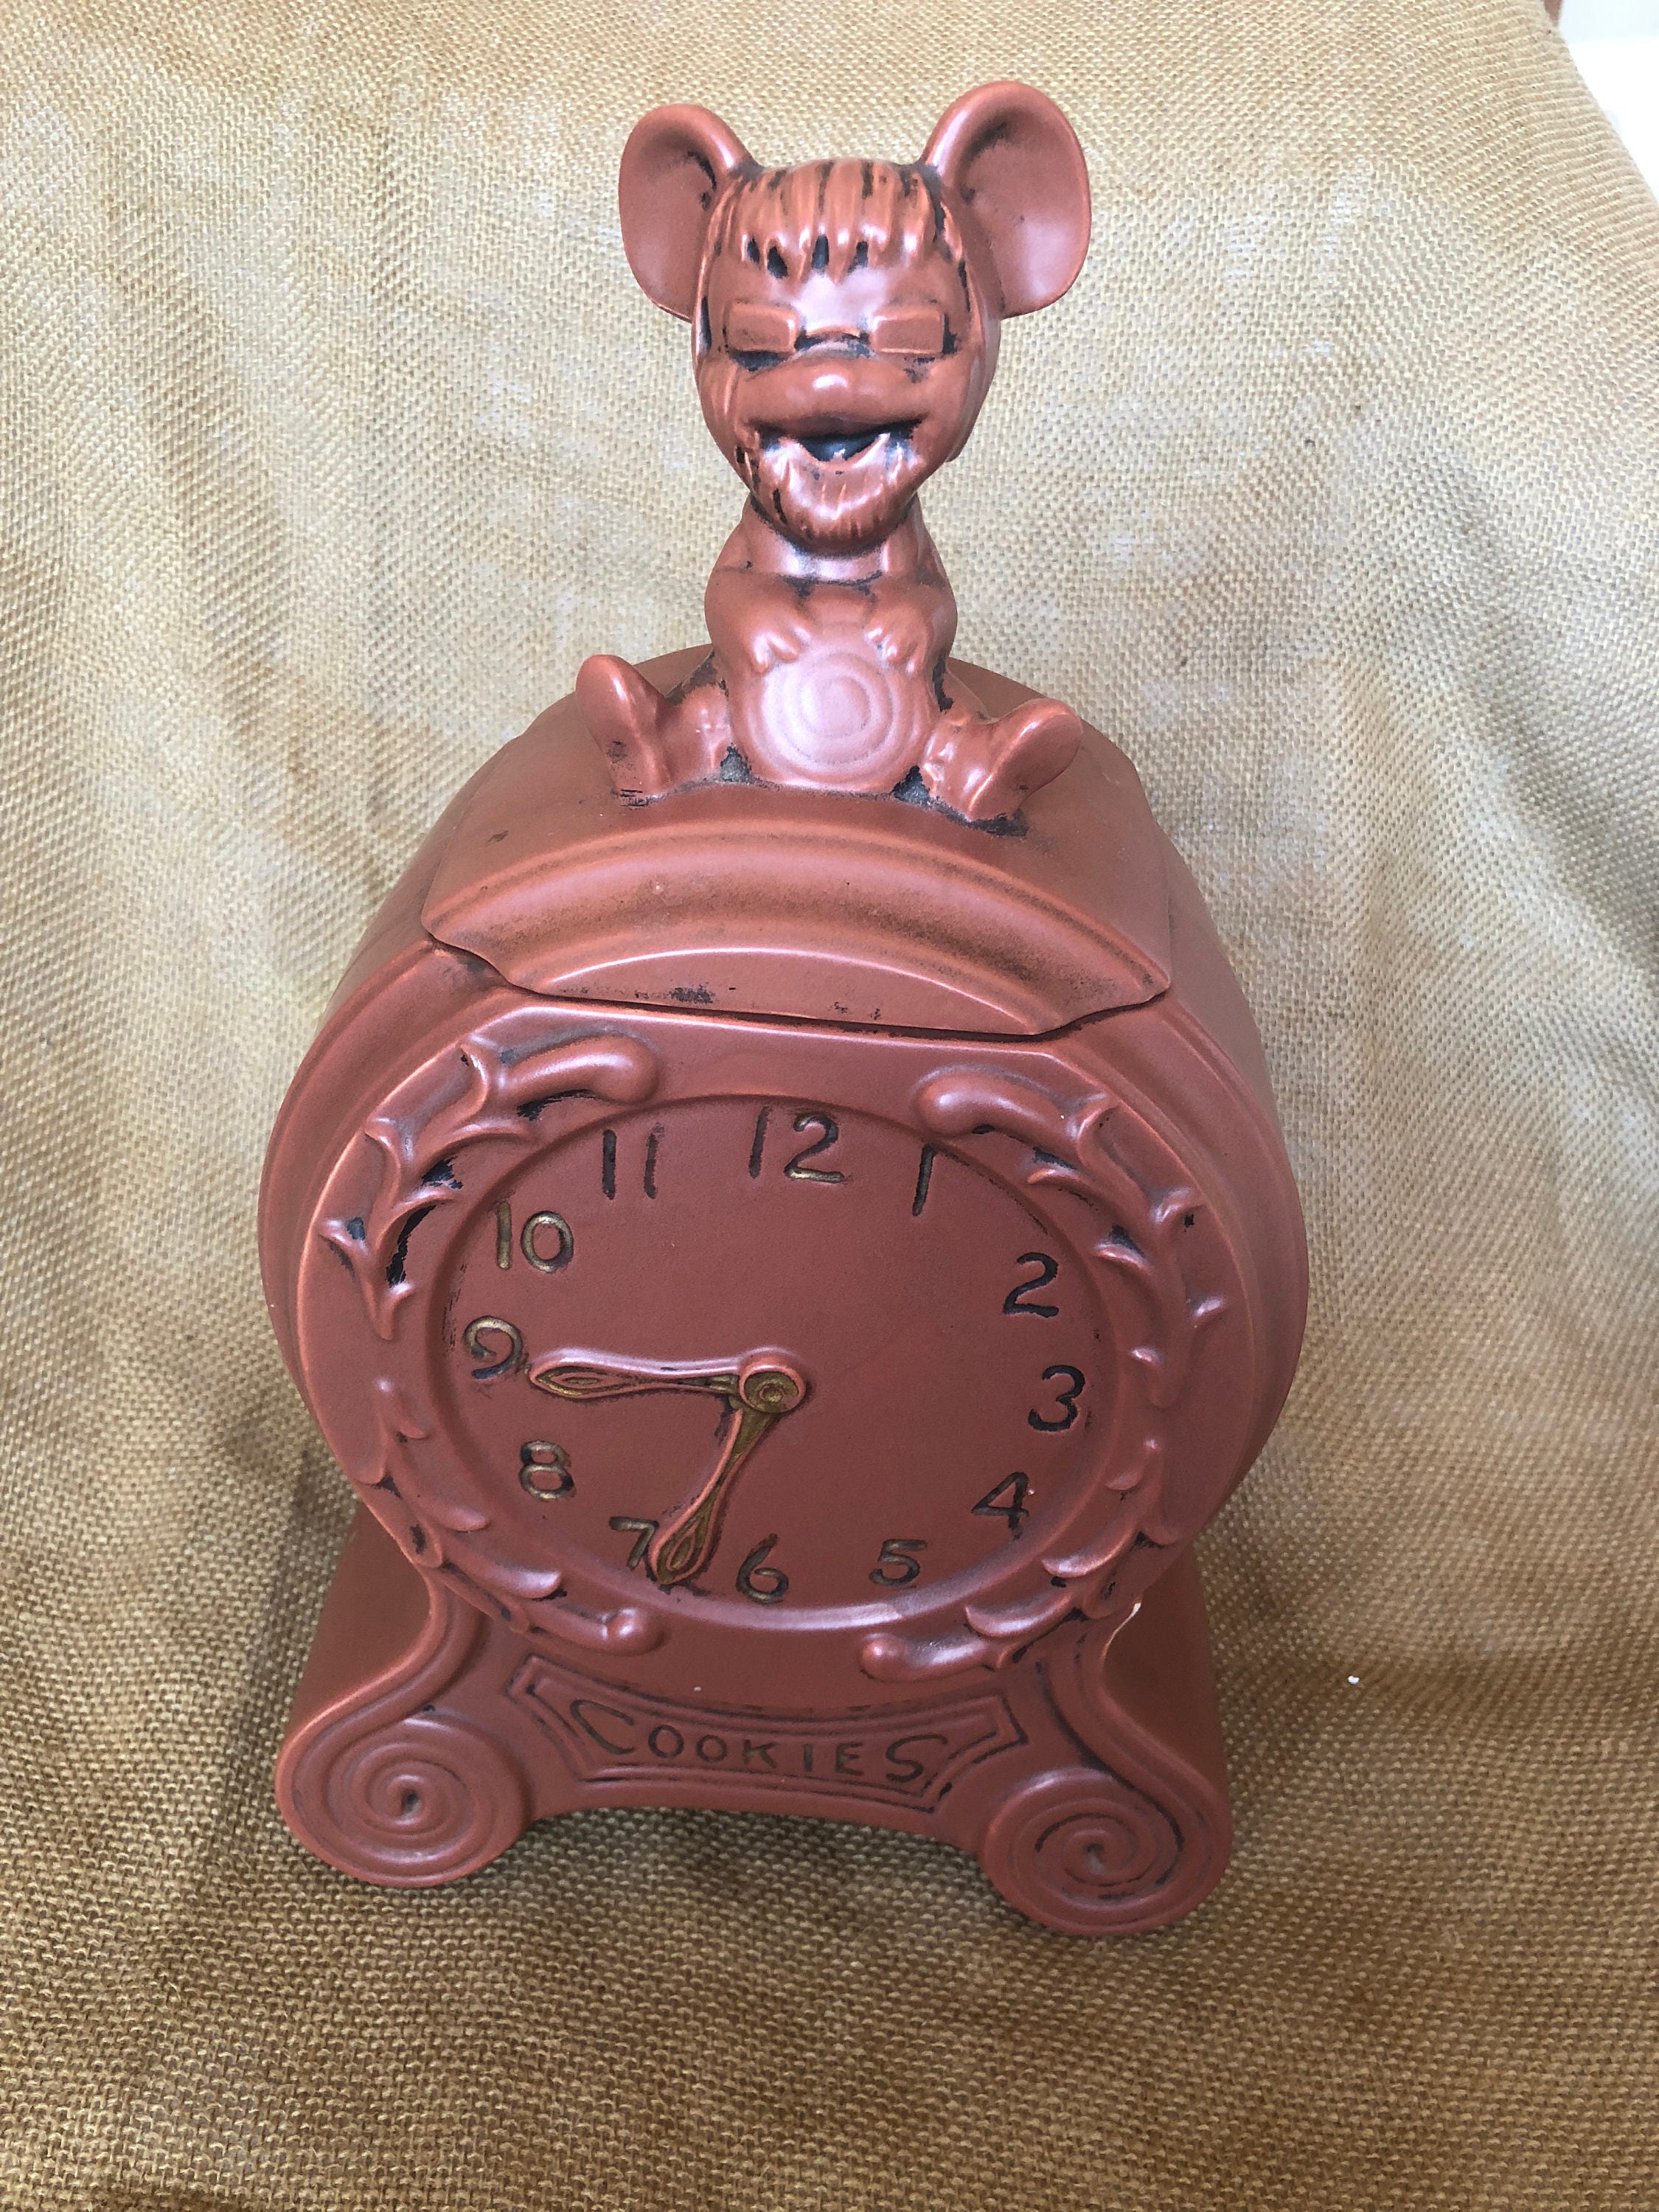 cookietime cookie jar - antiques - by owner - collectibles sale